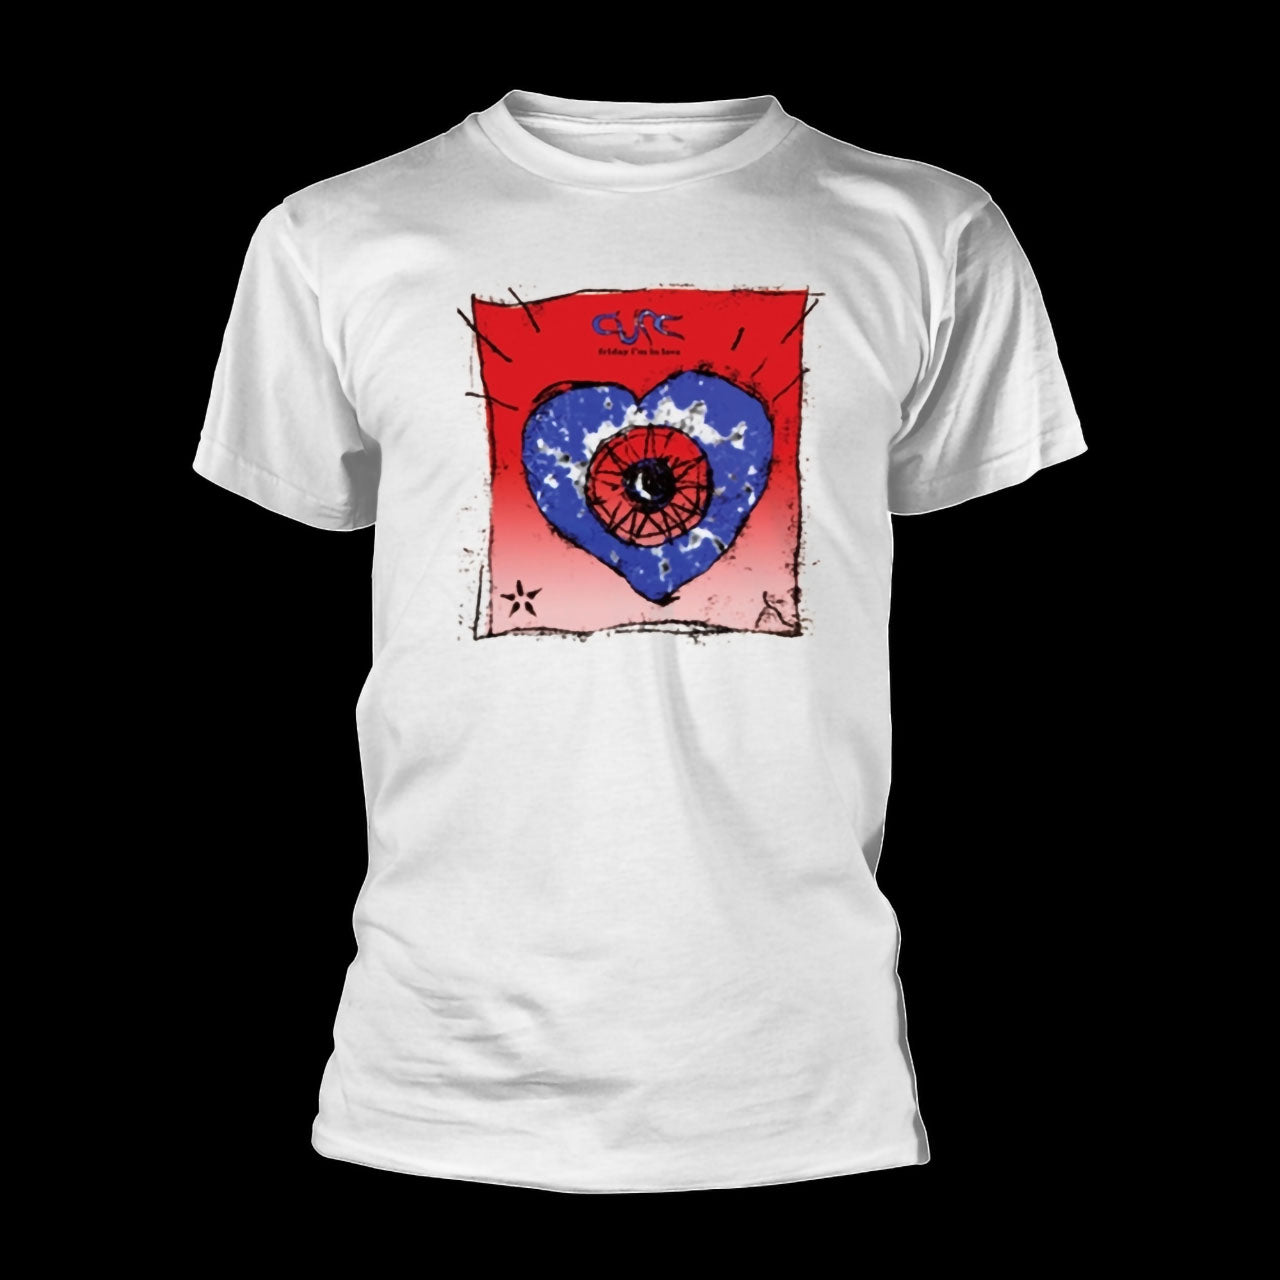 The Cure - Friday I'm in Love (T-Shirt)